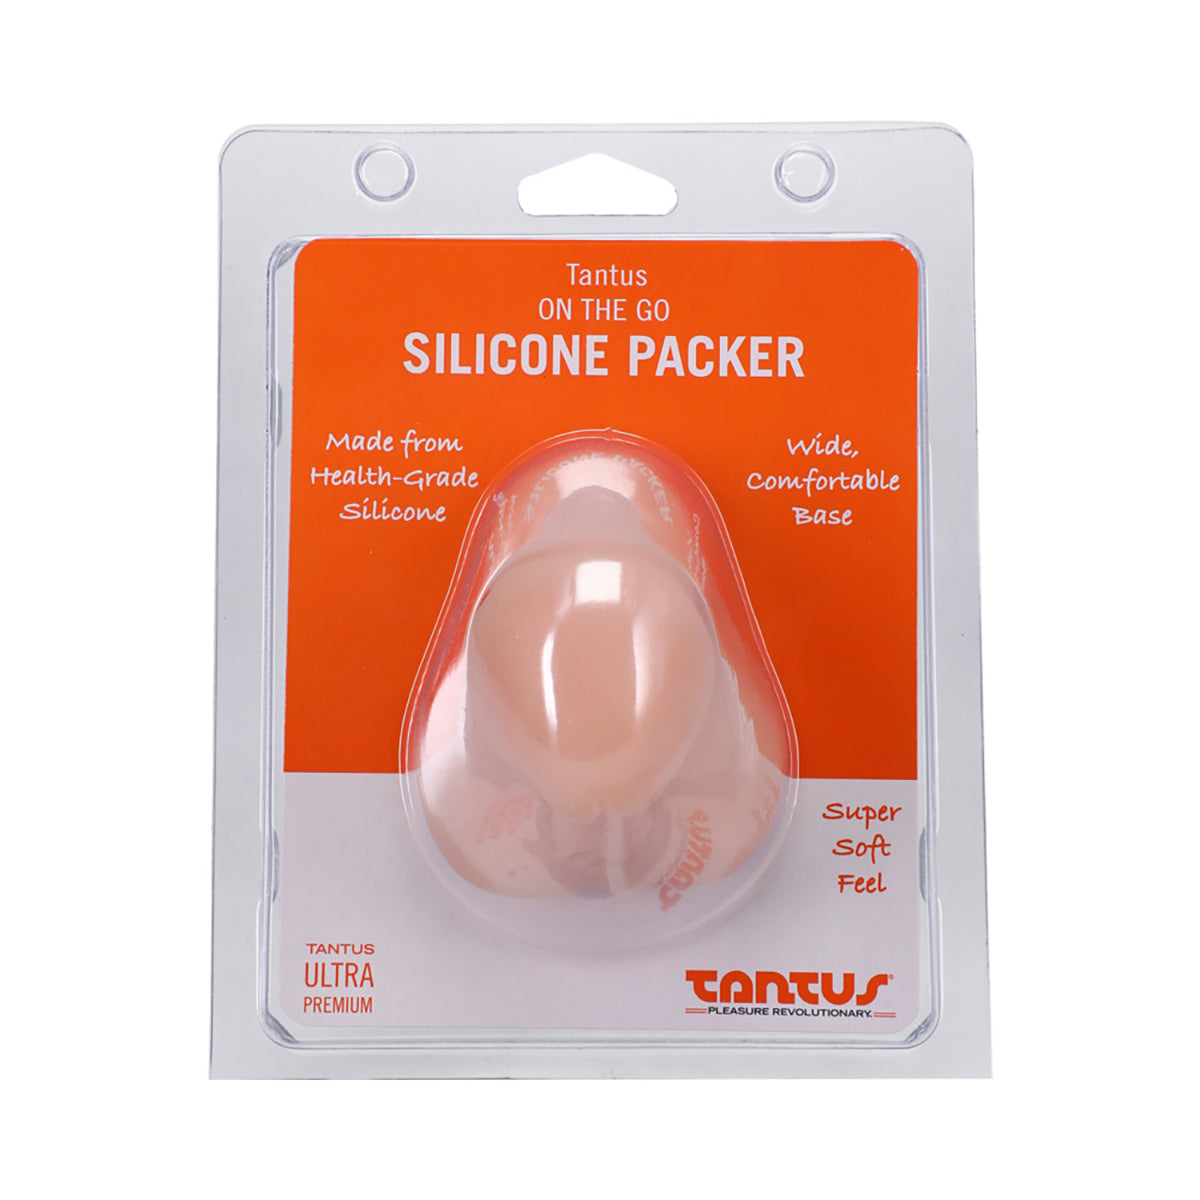 Tantus On The Go Silicone Packer Cream